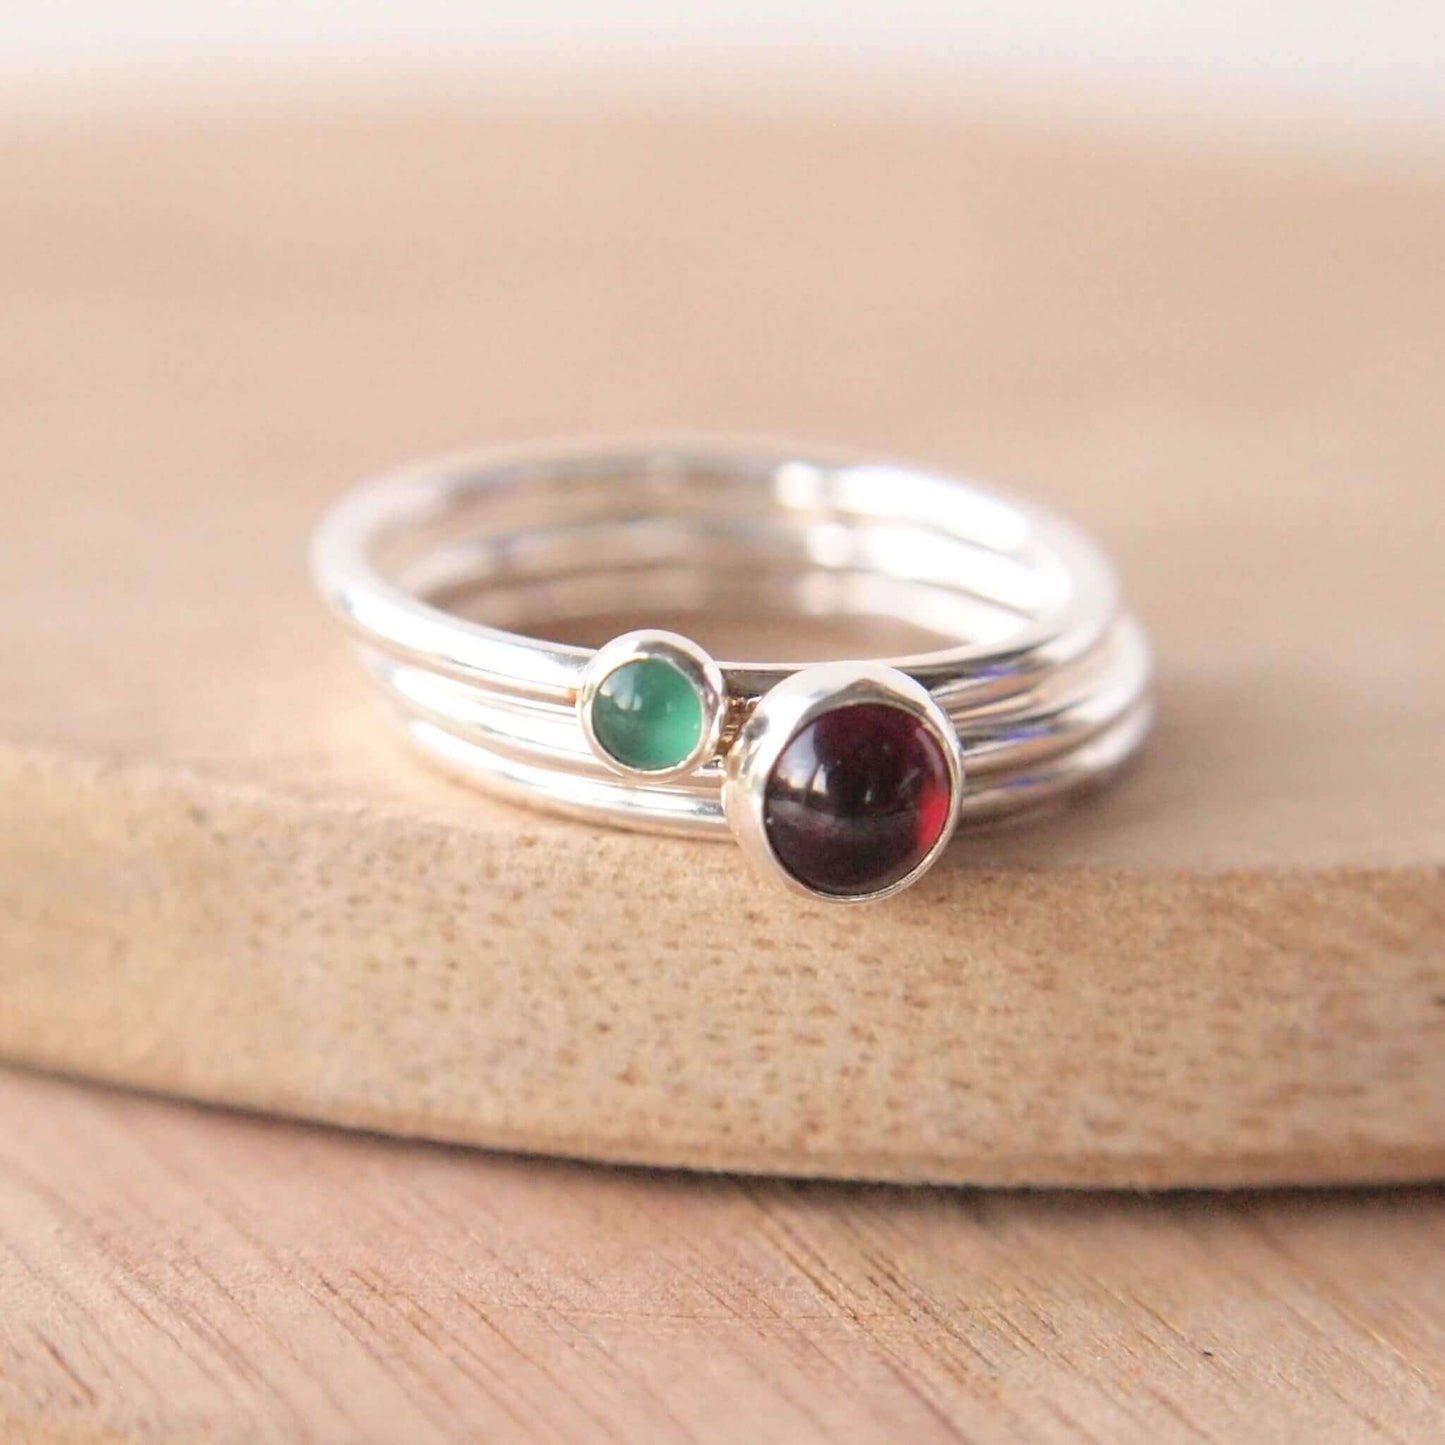 Double ring set with January and May Birthstones. January birthstone ring has a 5mm round dark red cabochon smooth cut stone, and the May birthstone is a green agate is a 3mm emerald green smooth round cabochon measuring 3mm, both are set onto individual bands of sterling silver. Handmade in Edinburgh by Maram Jewellery